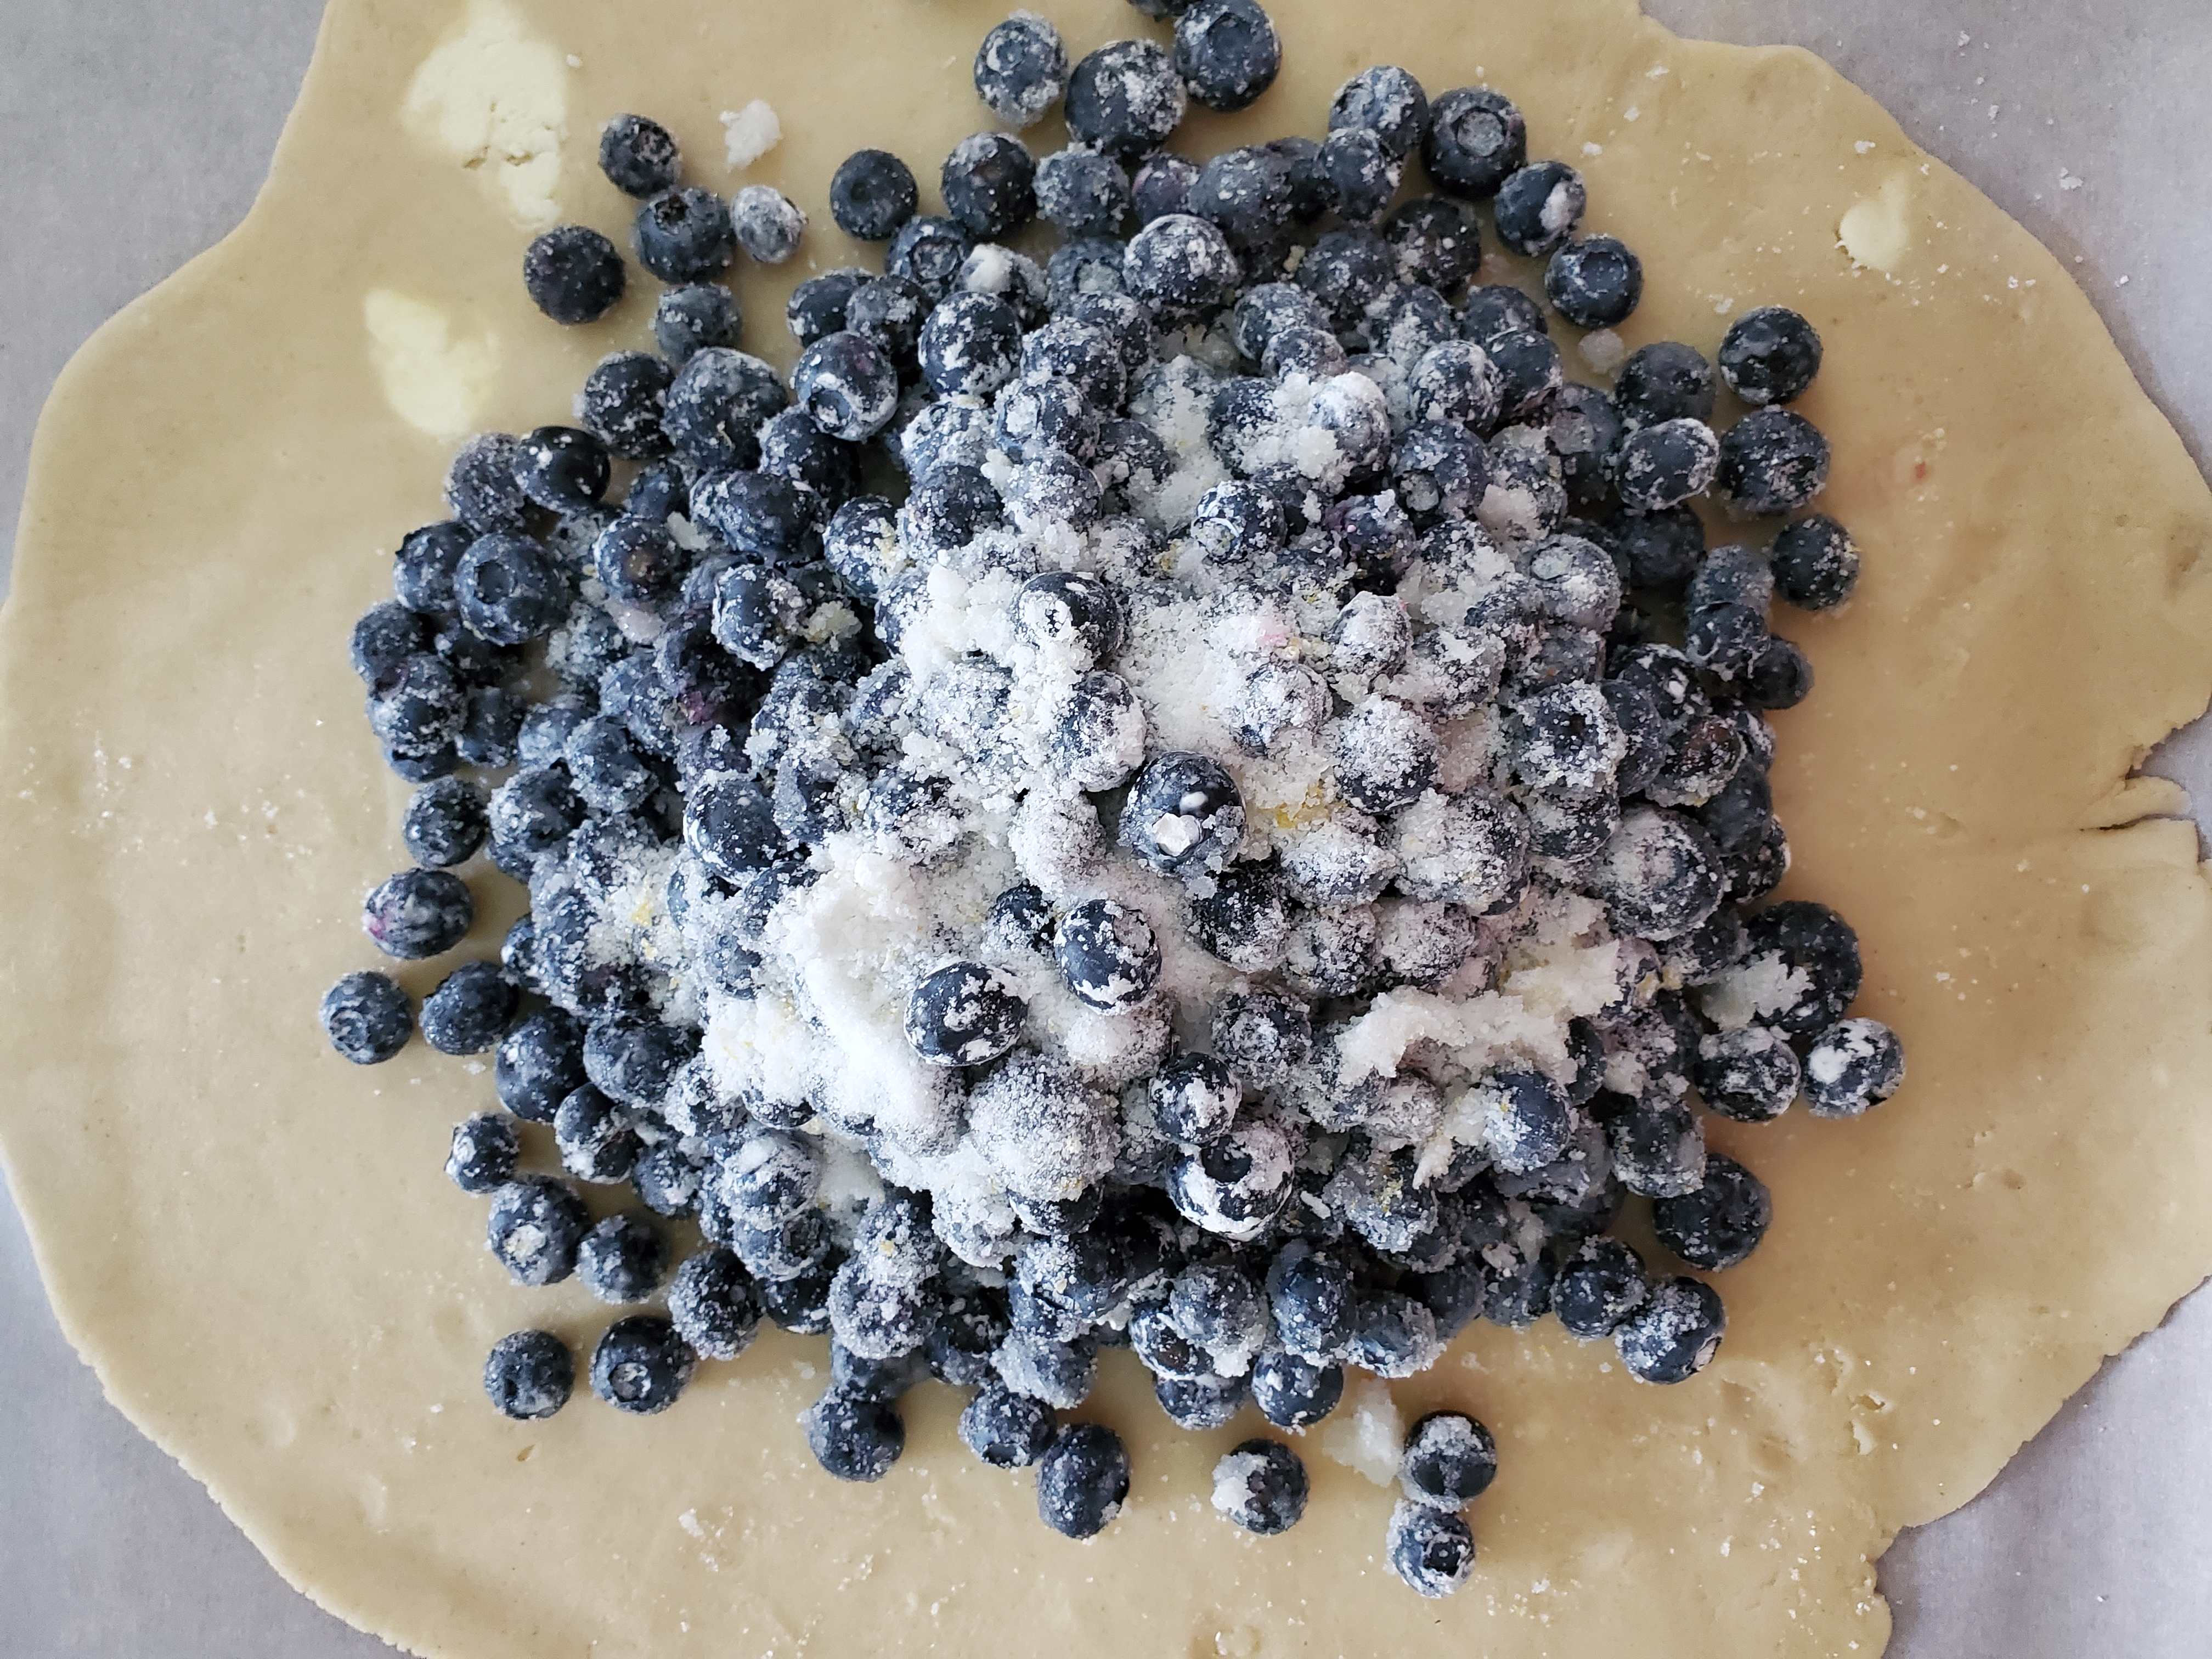 blueberries piled on pie dough